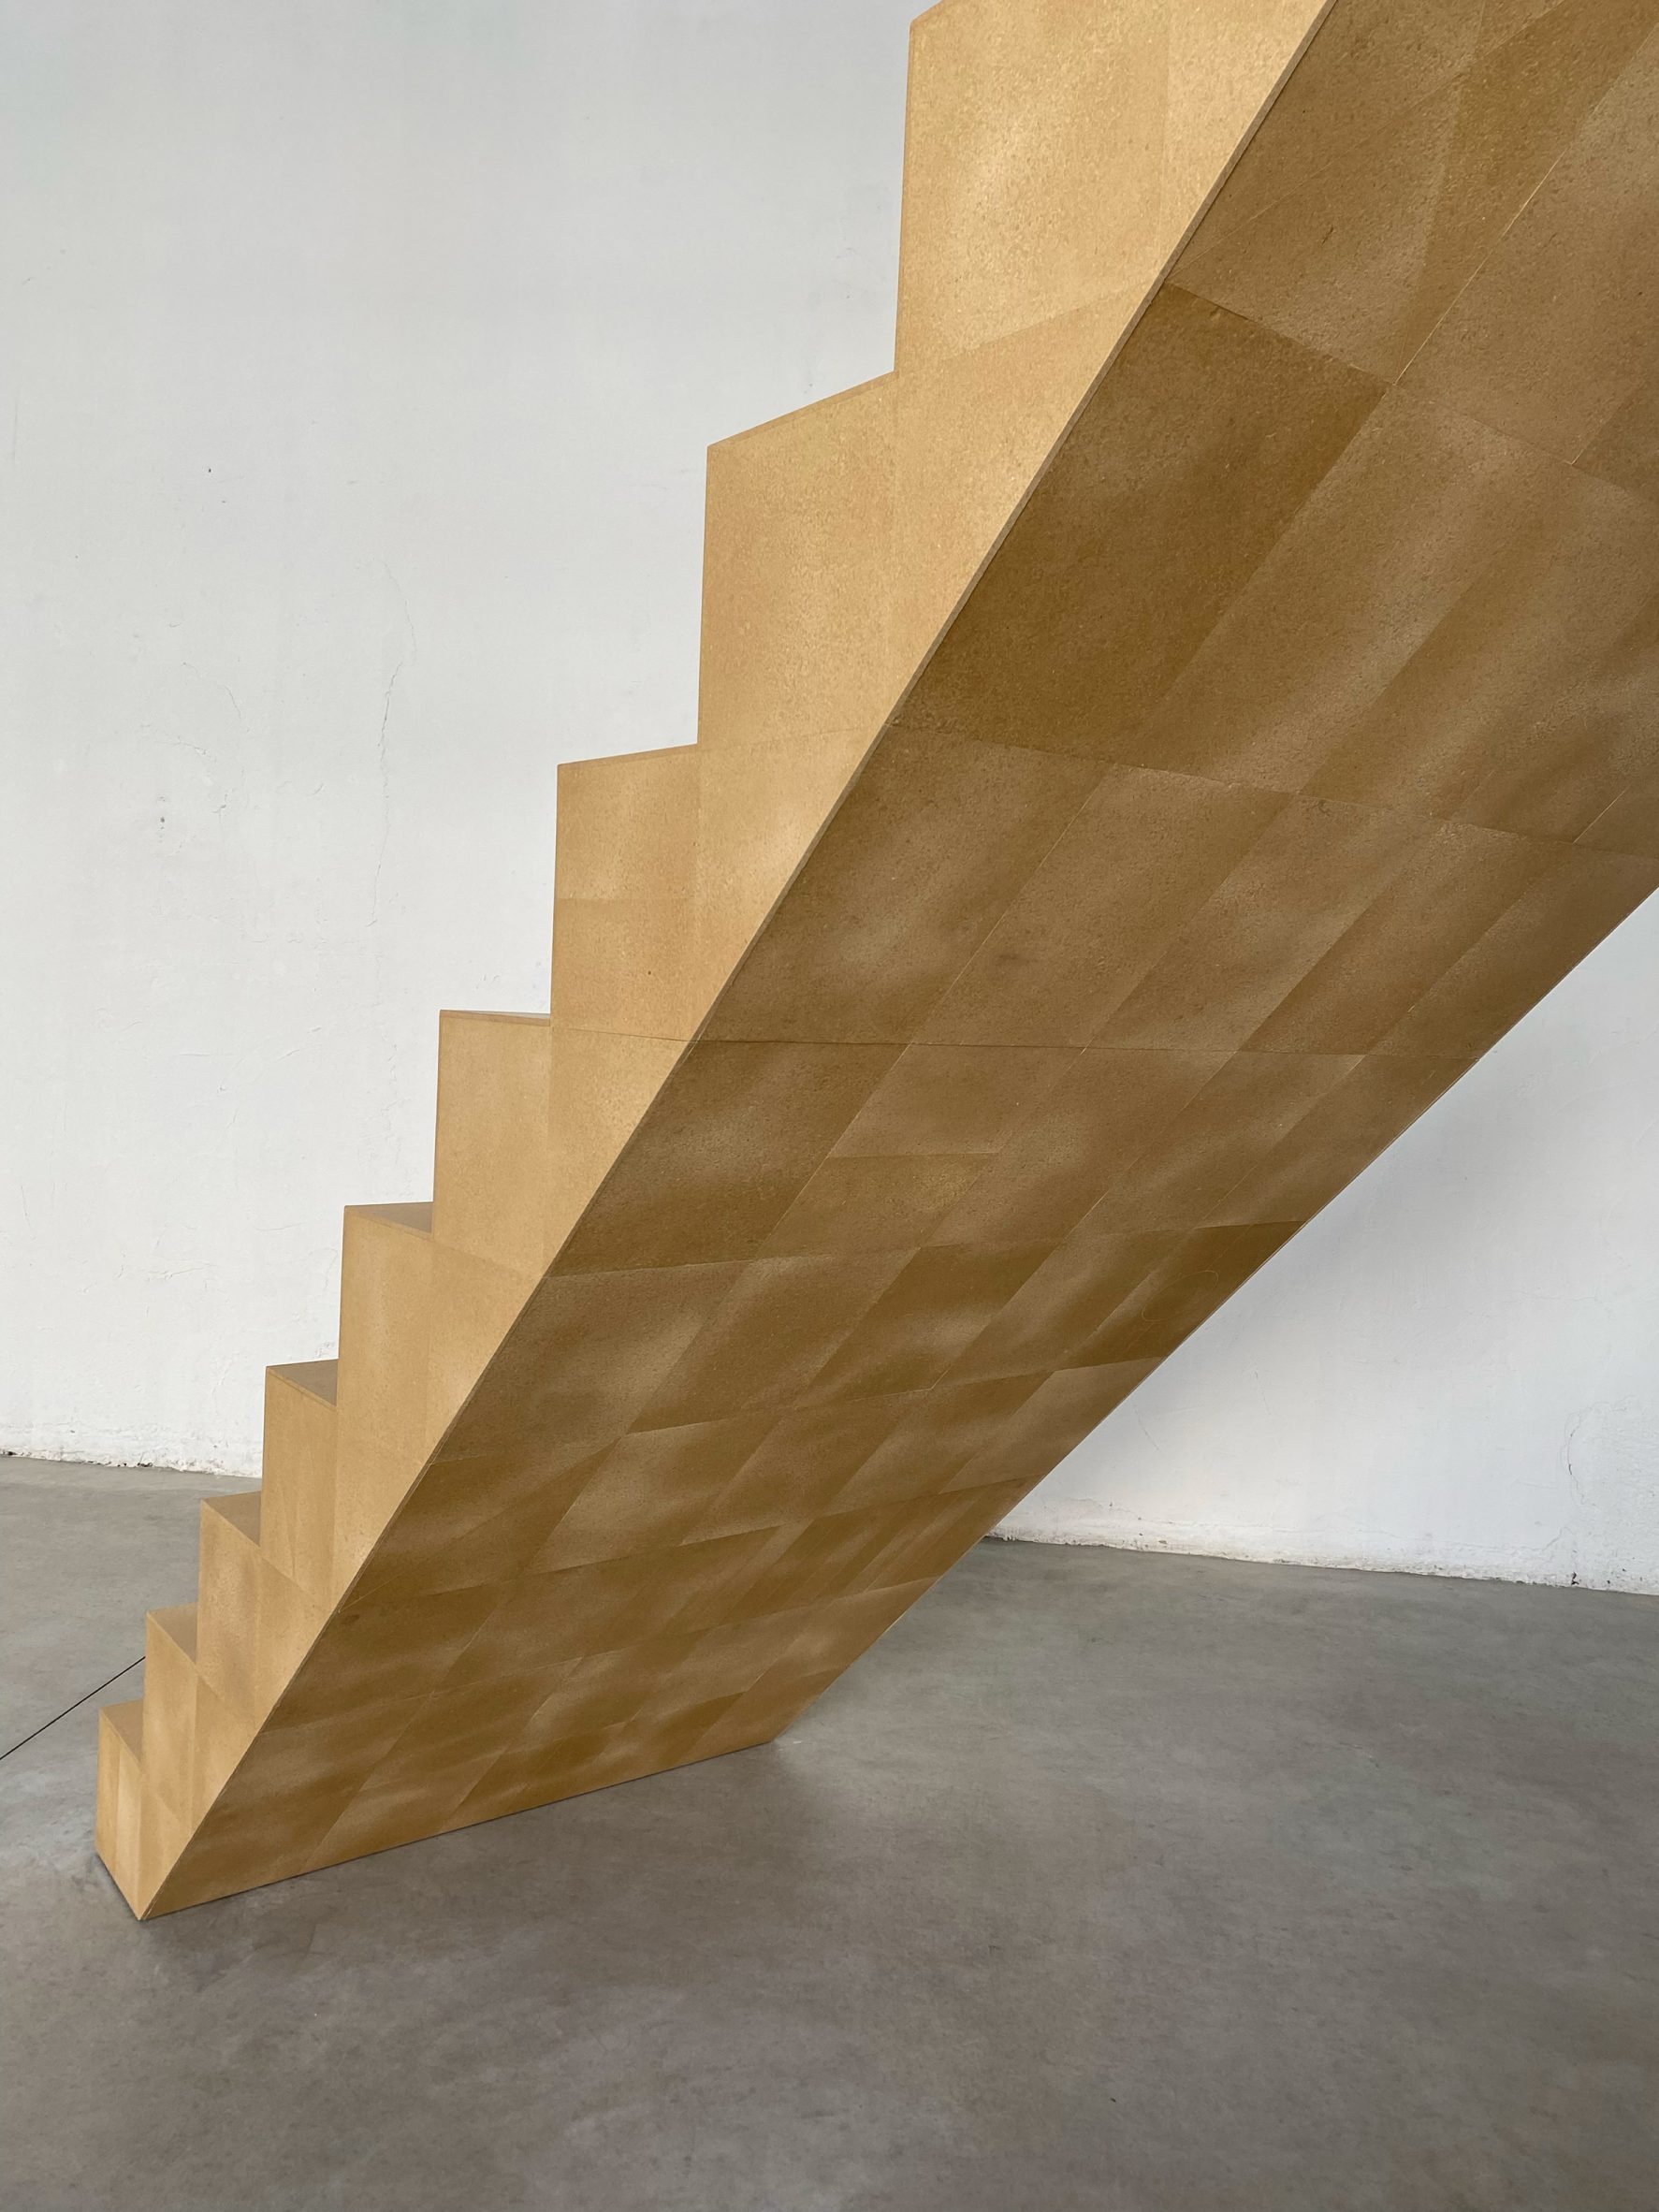 The staircase installation leads to nowhere